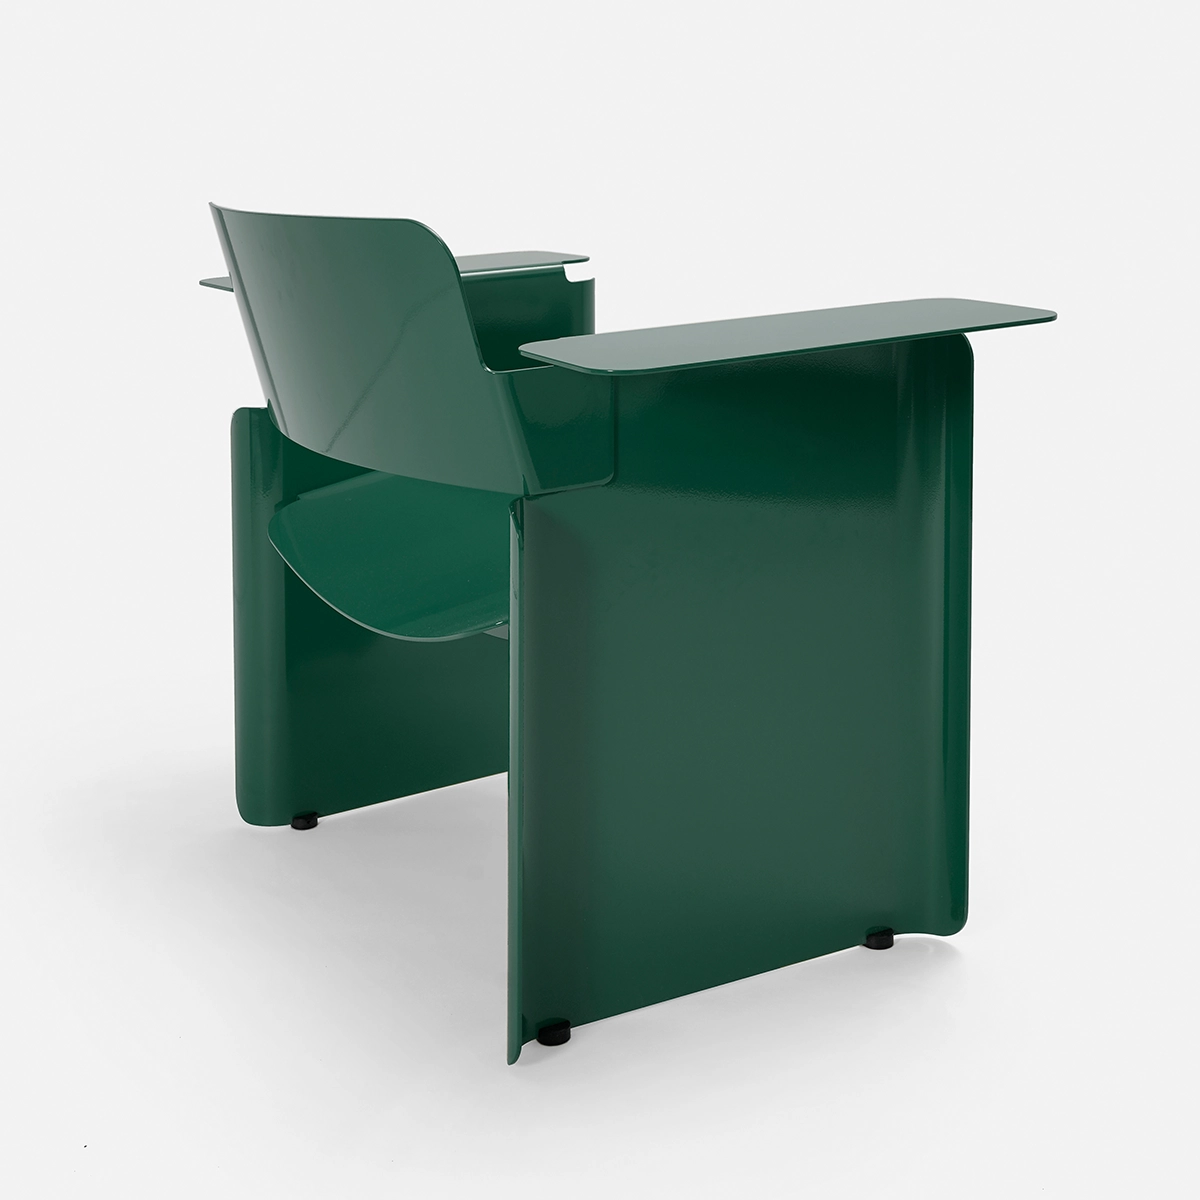 AL13 armchair by Haus Otto for DANTE - Goods and Bads